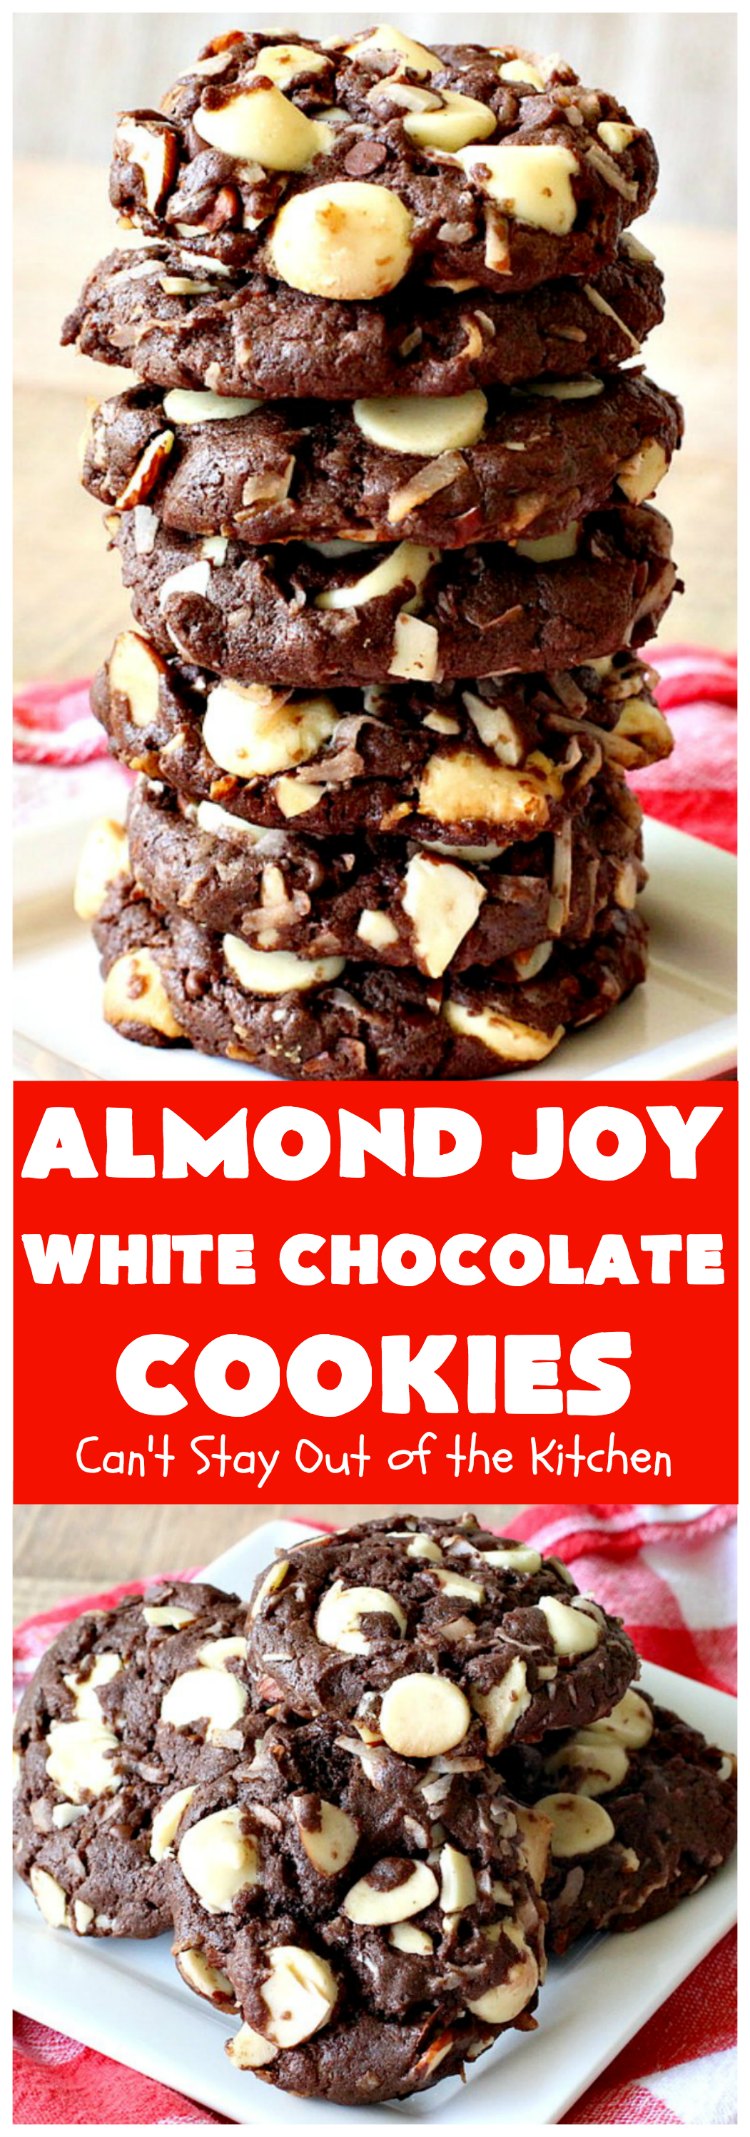 Almond Joy White Chocolate Cookies | Can't Stay Out of the Kitchen